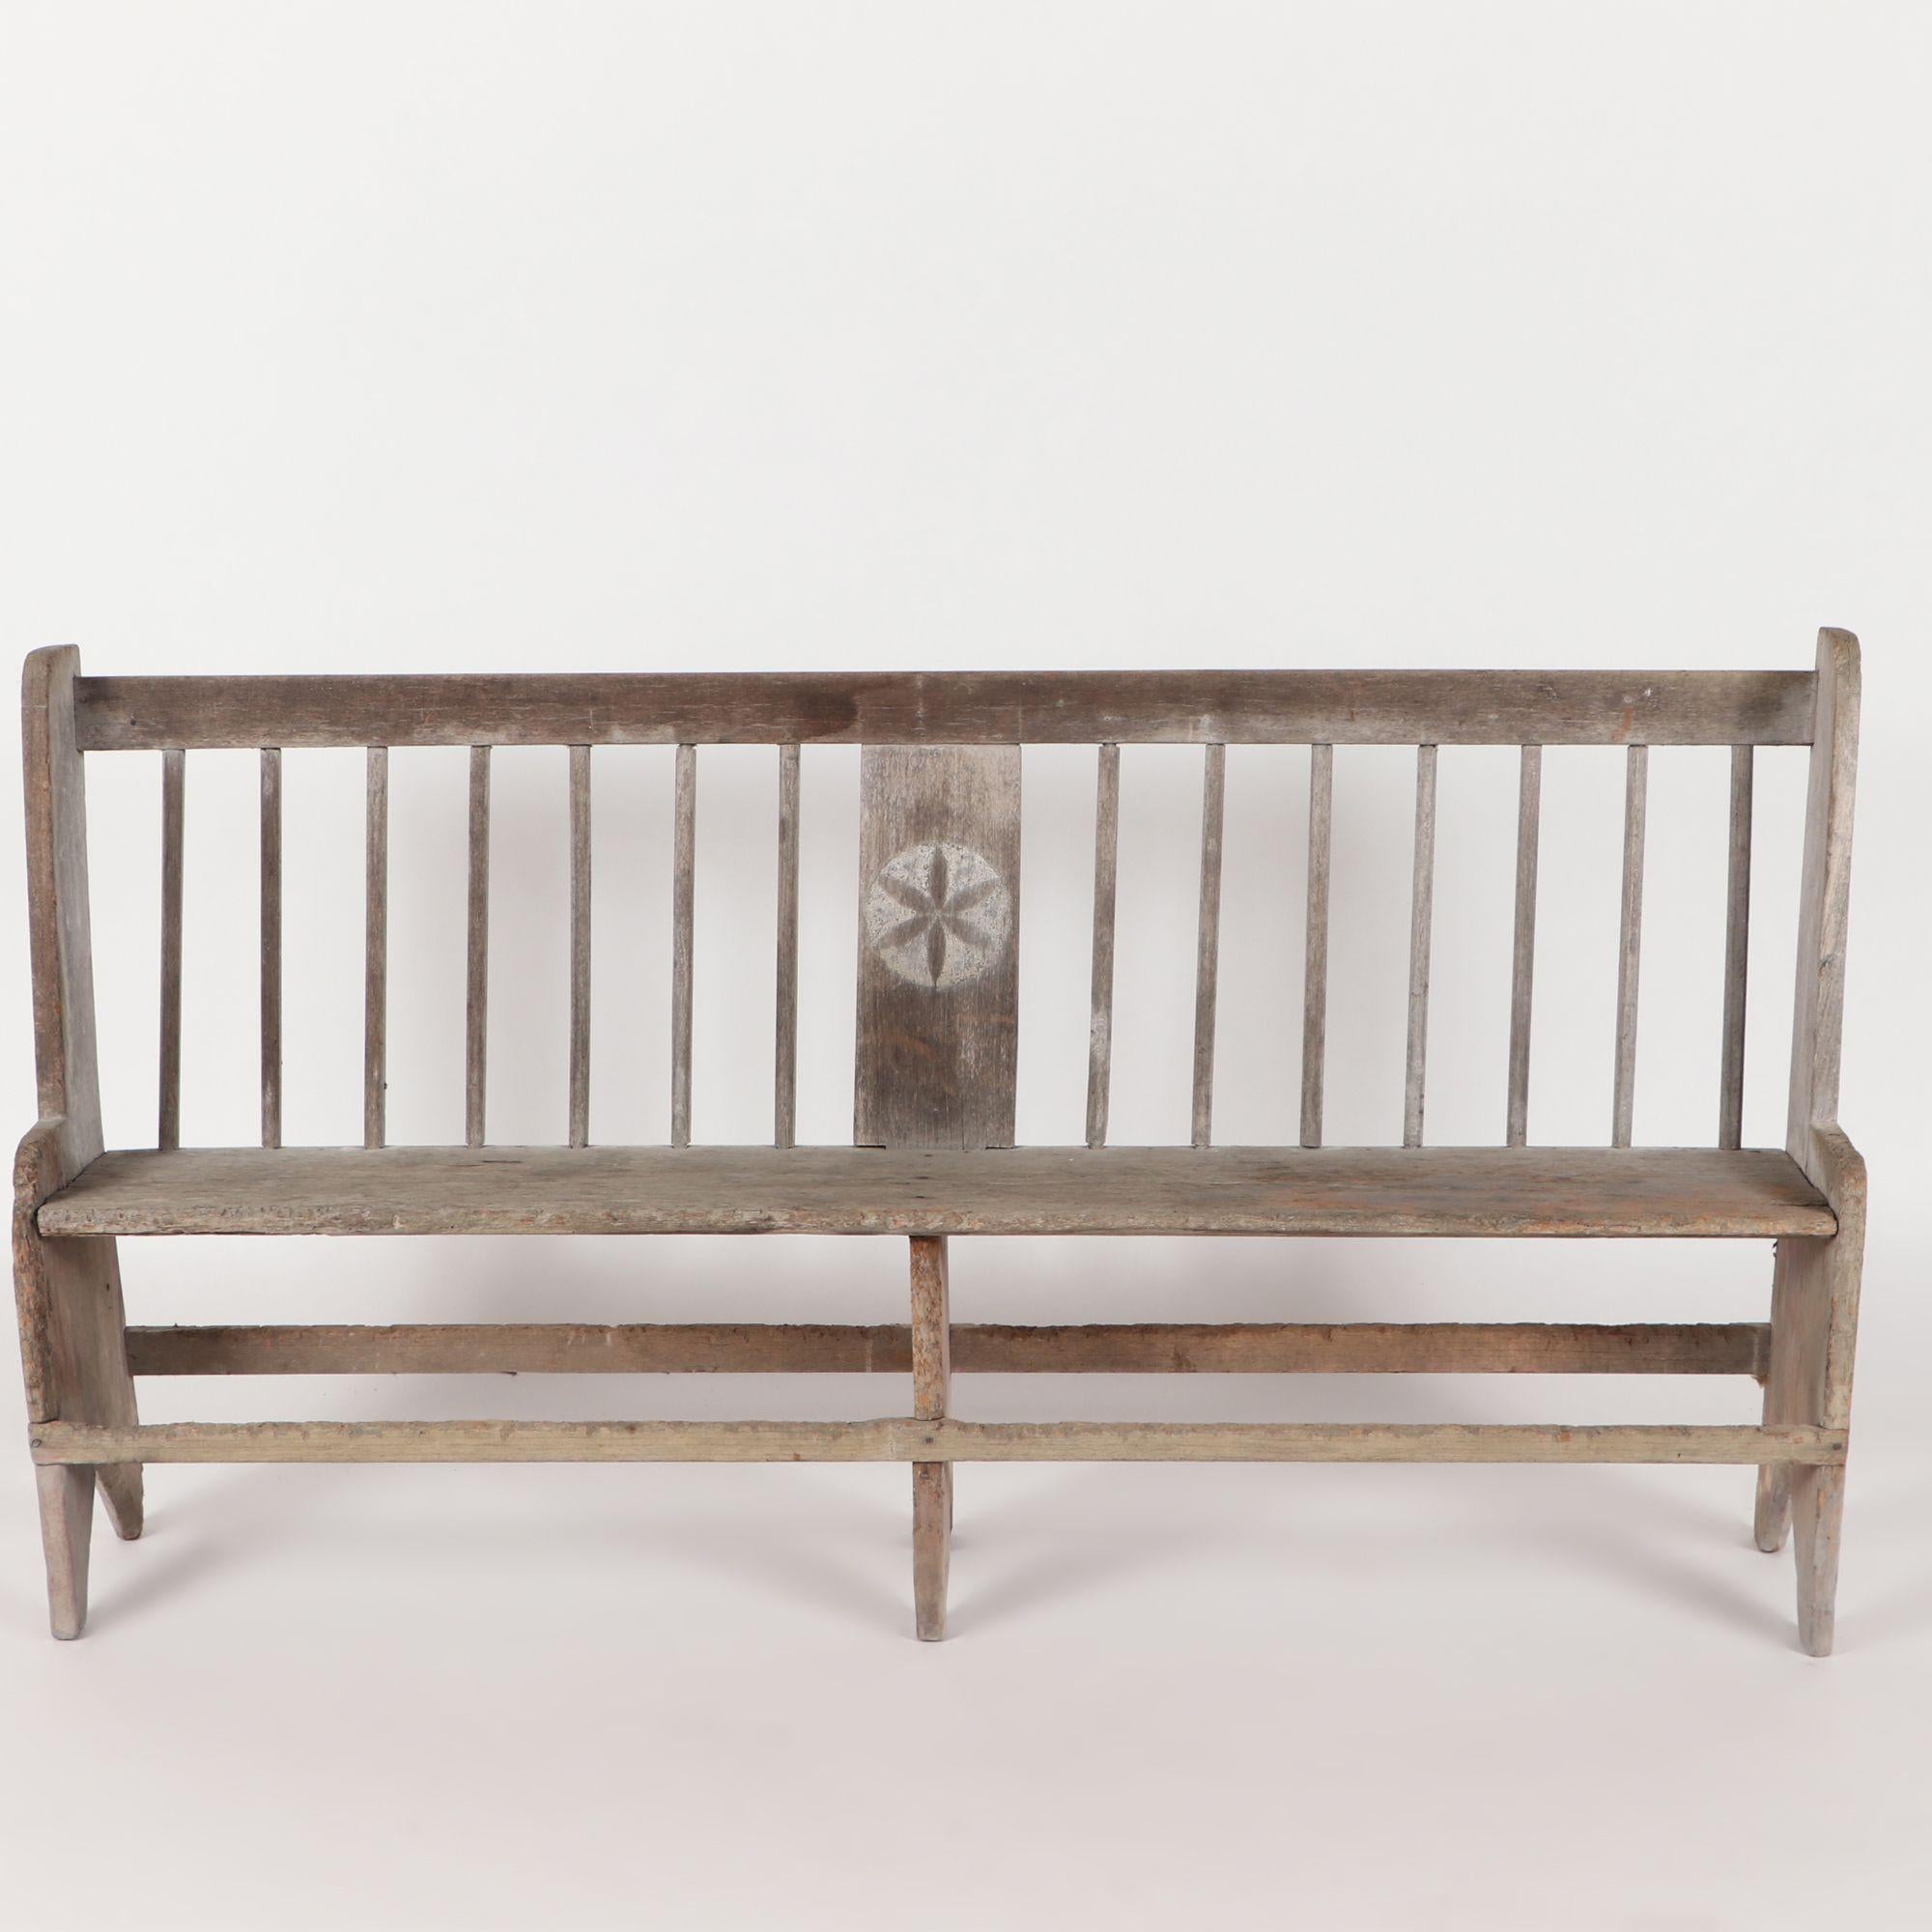 An antique bench having central hex decoration flanked by vertical rails, circa 1800.